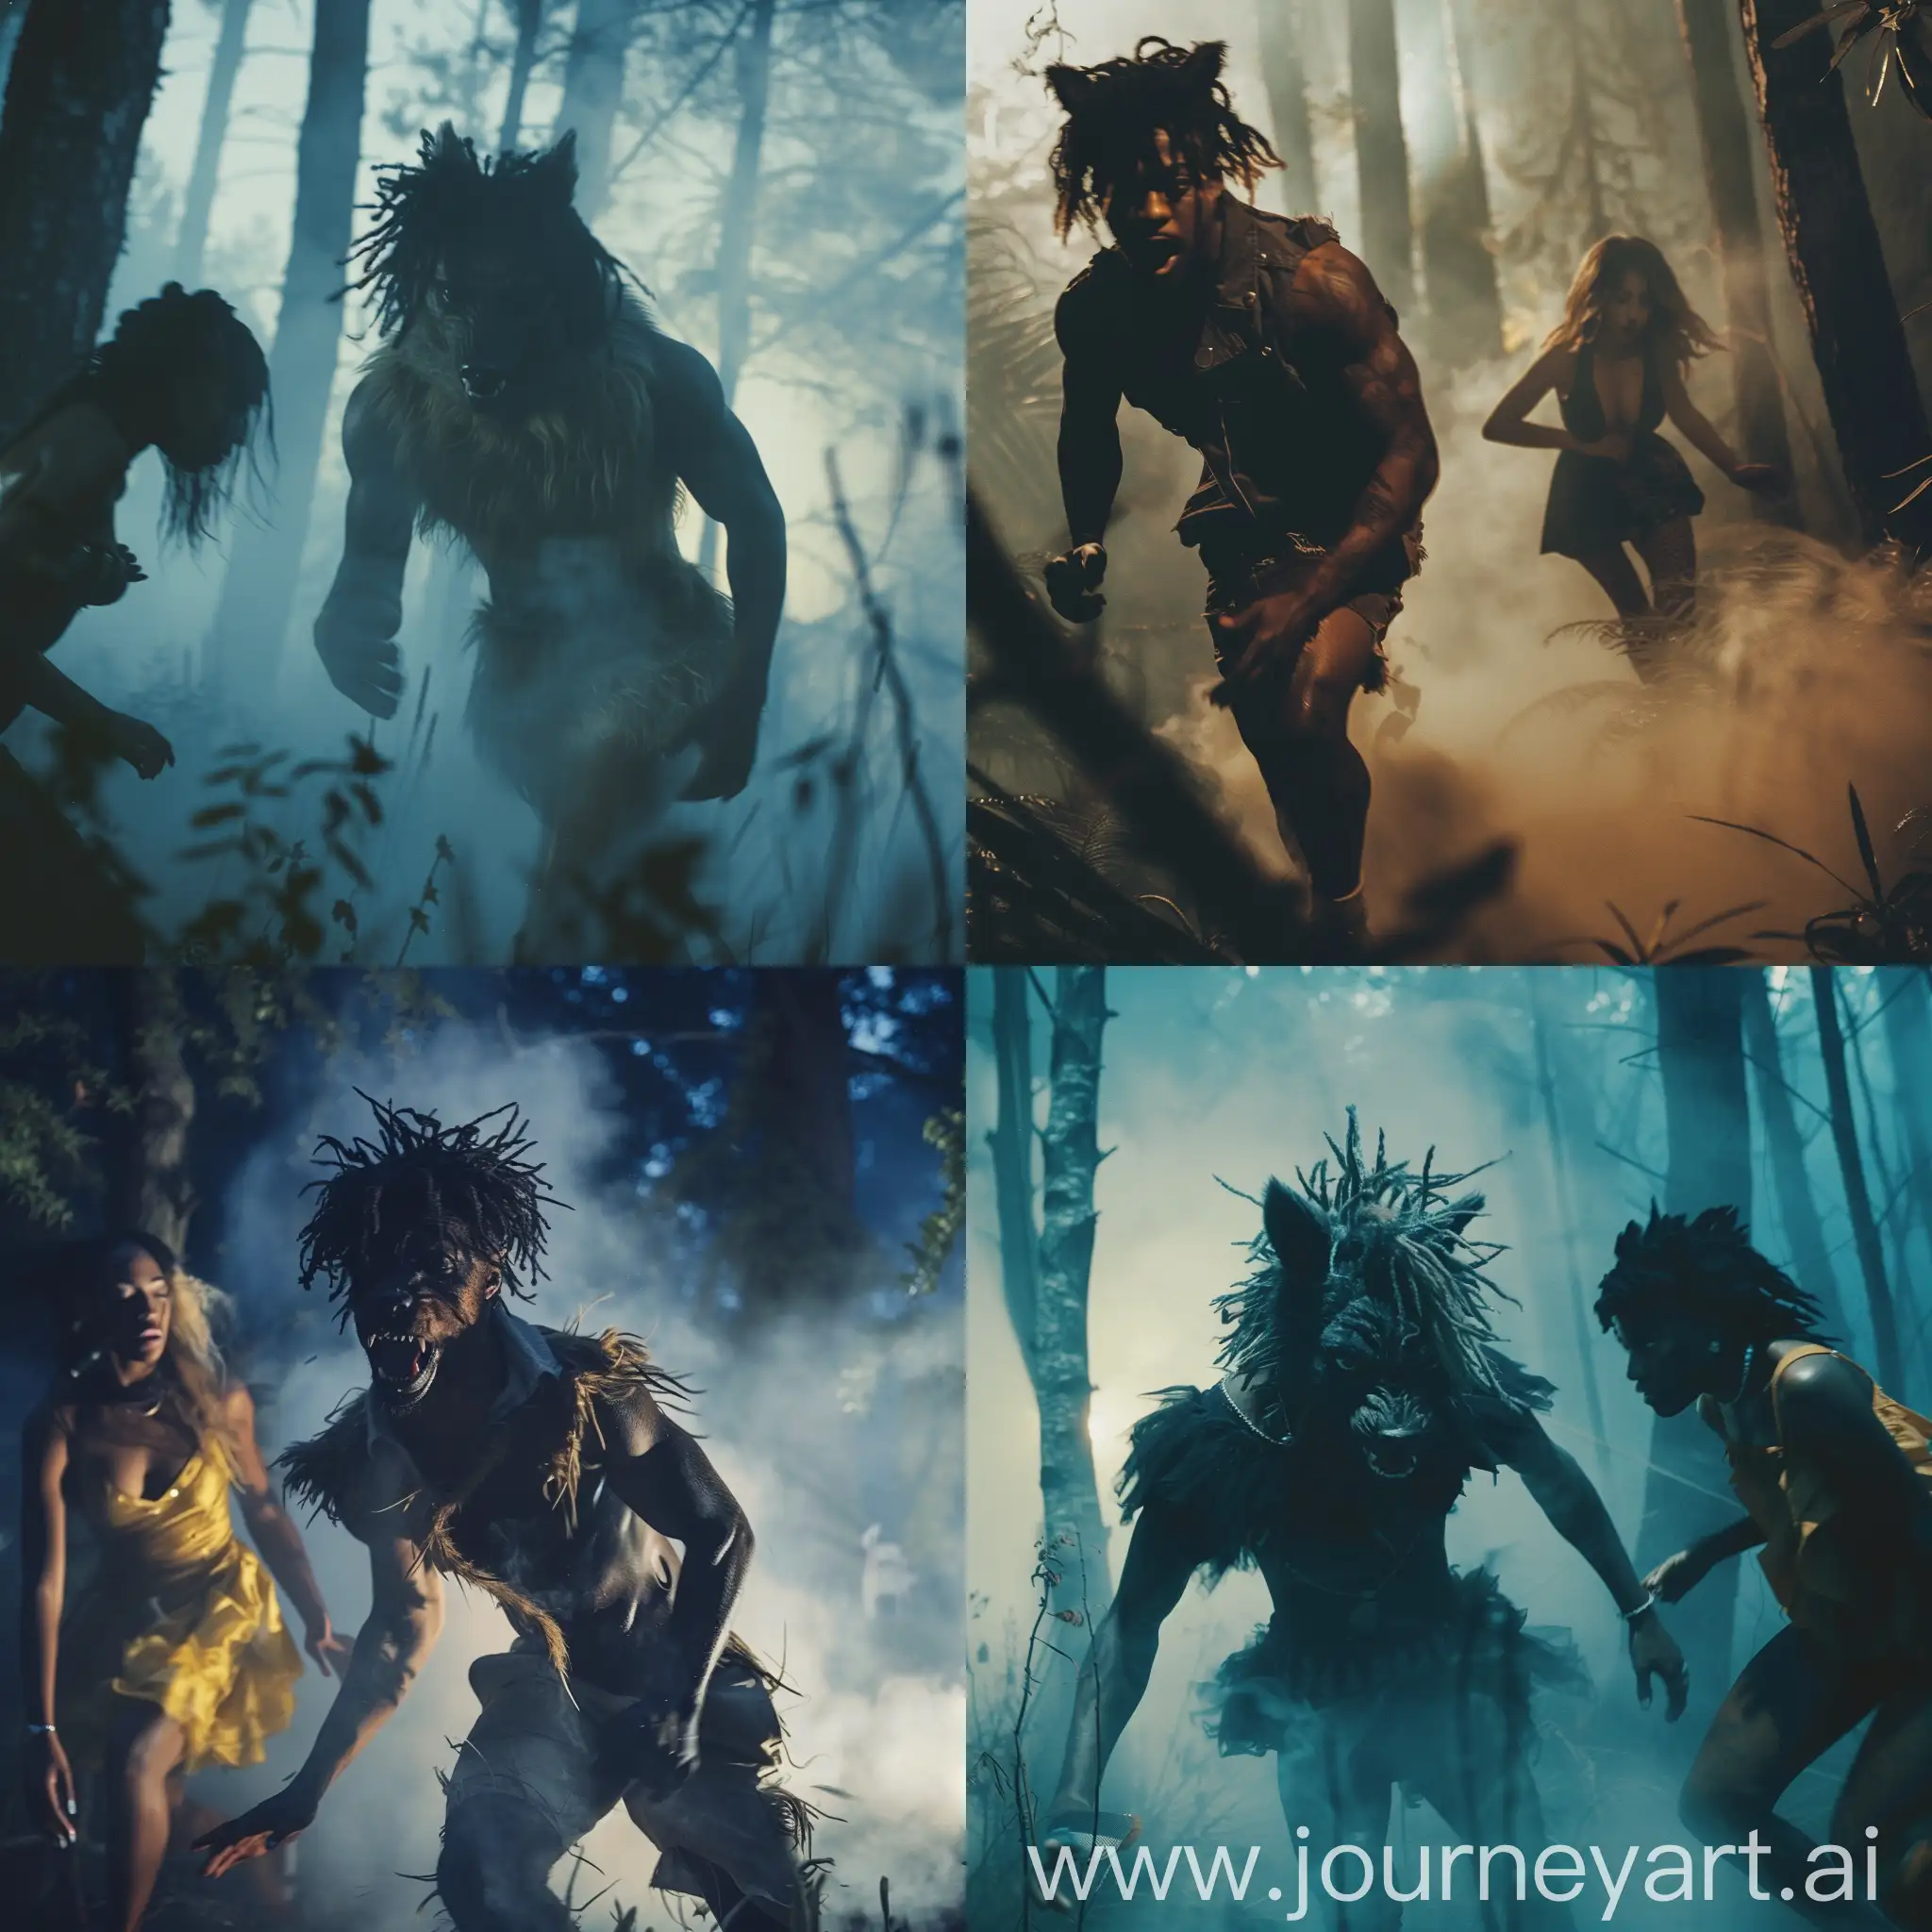 Juice-Wrld-Warewolf-Chasing-Woman-in-Smoky-Forest-1980s-Thriller-Music-Video